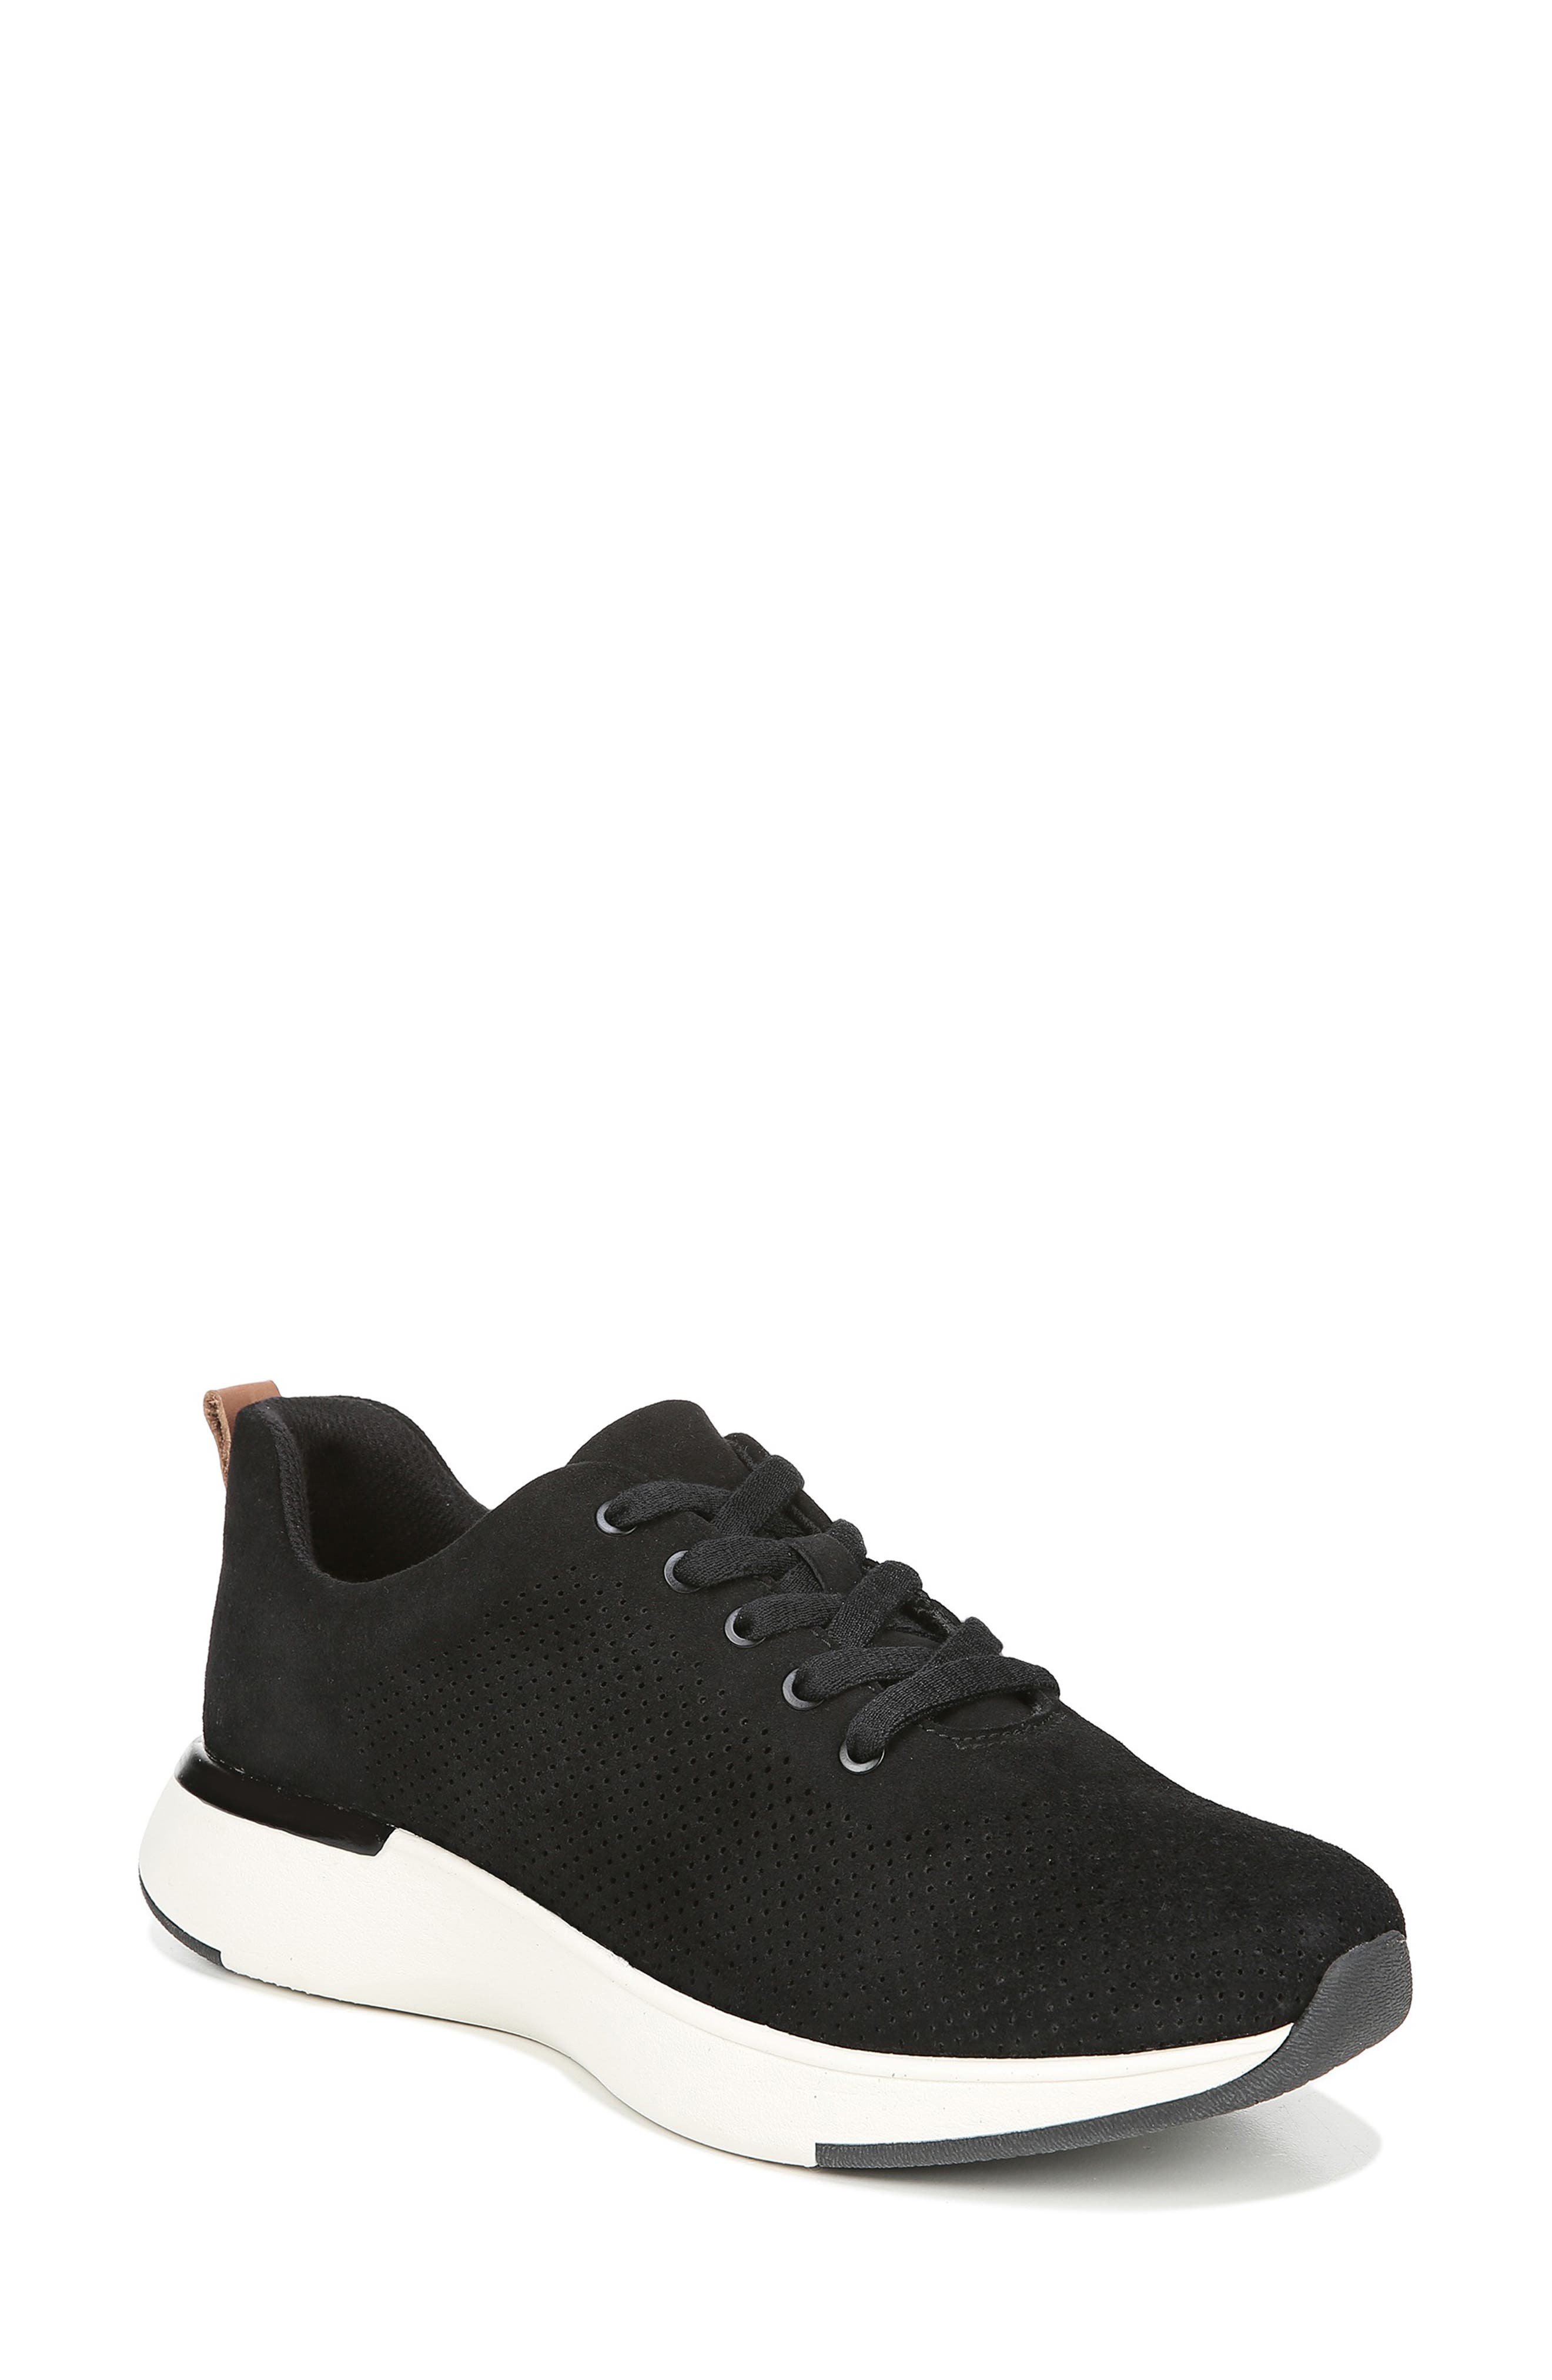 UPC 736709695796 product image for Women's Dr. Scholl's Yes Please Sneaker, Size 6 M - Black | upcitemdb.com